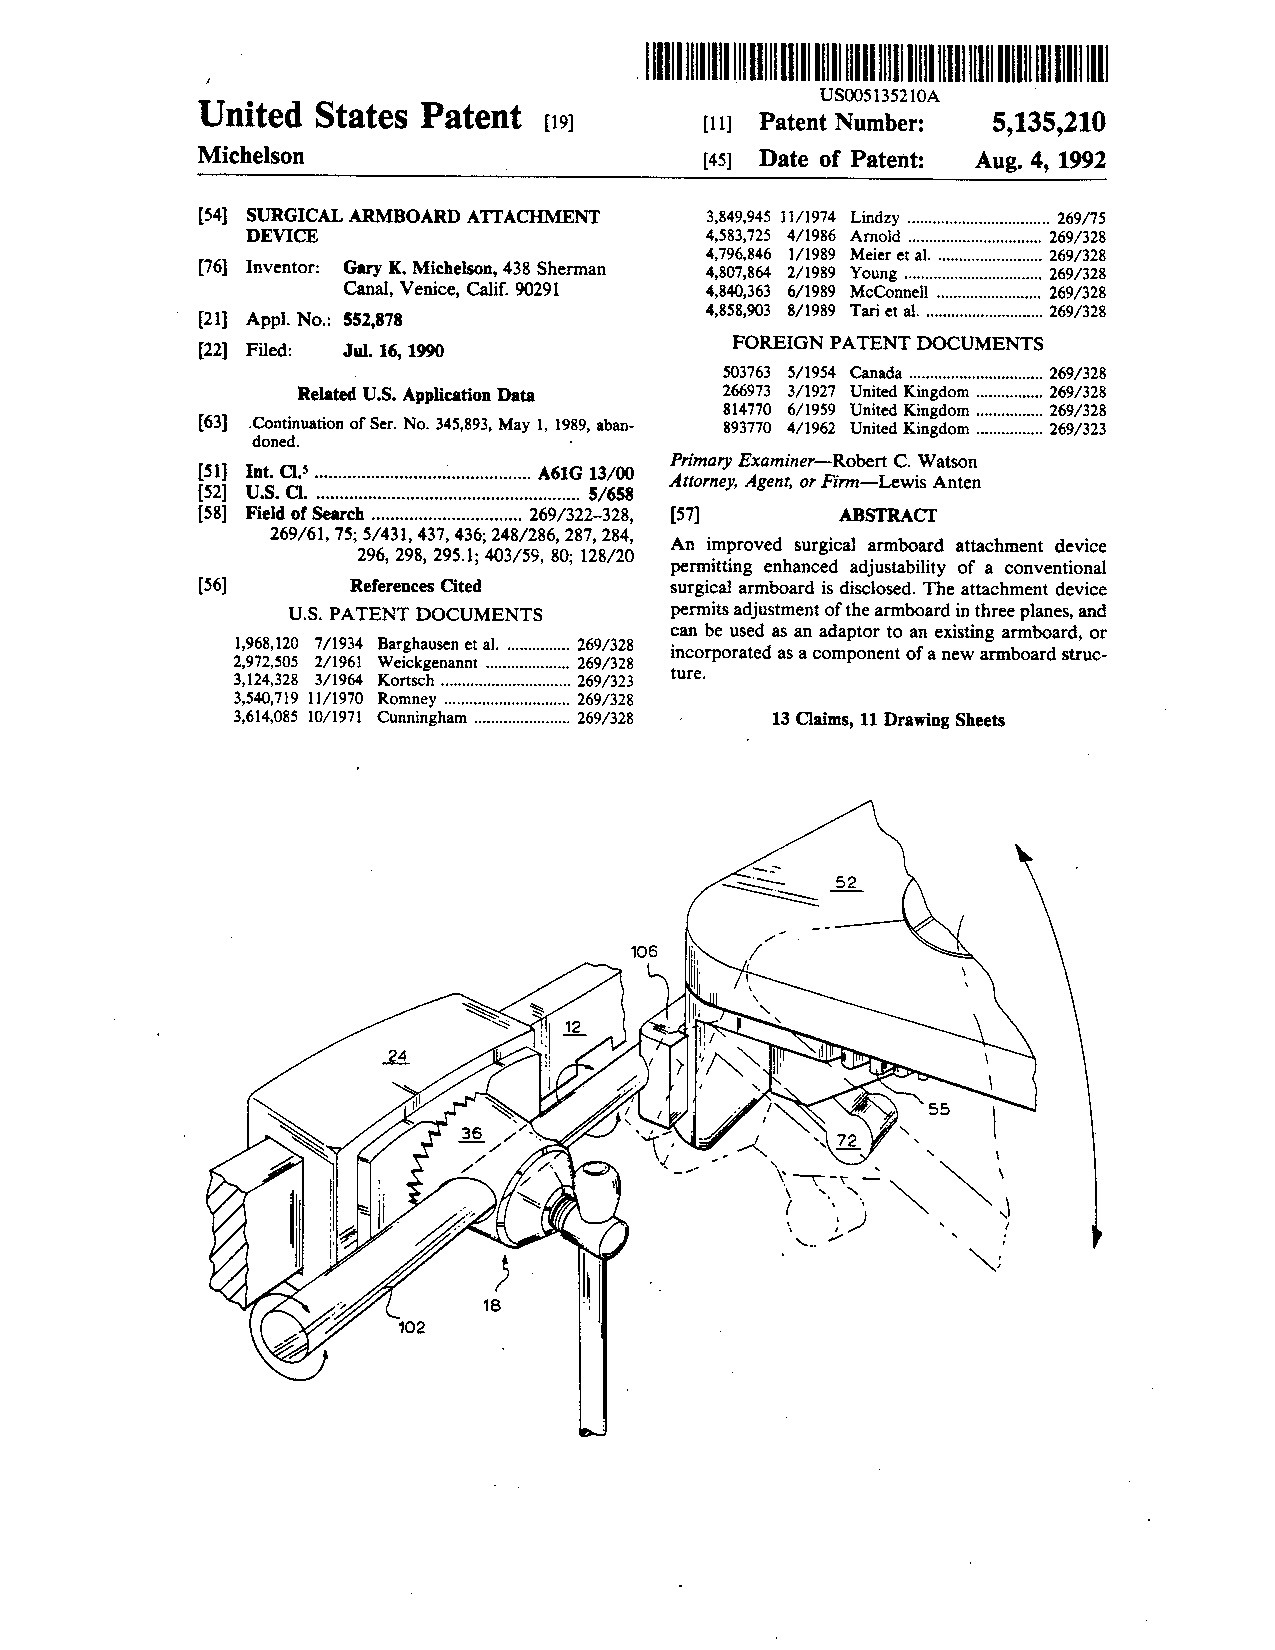 Surgical armboard attachment device - Patent 5,135,210